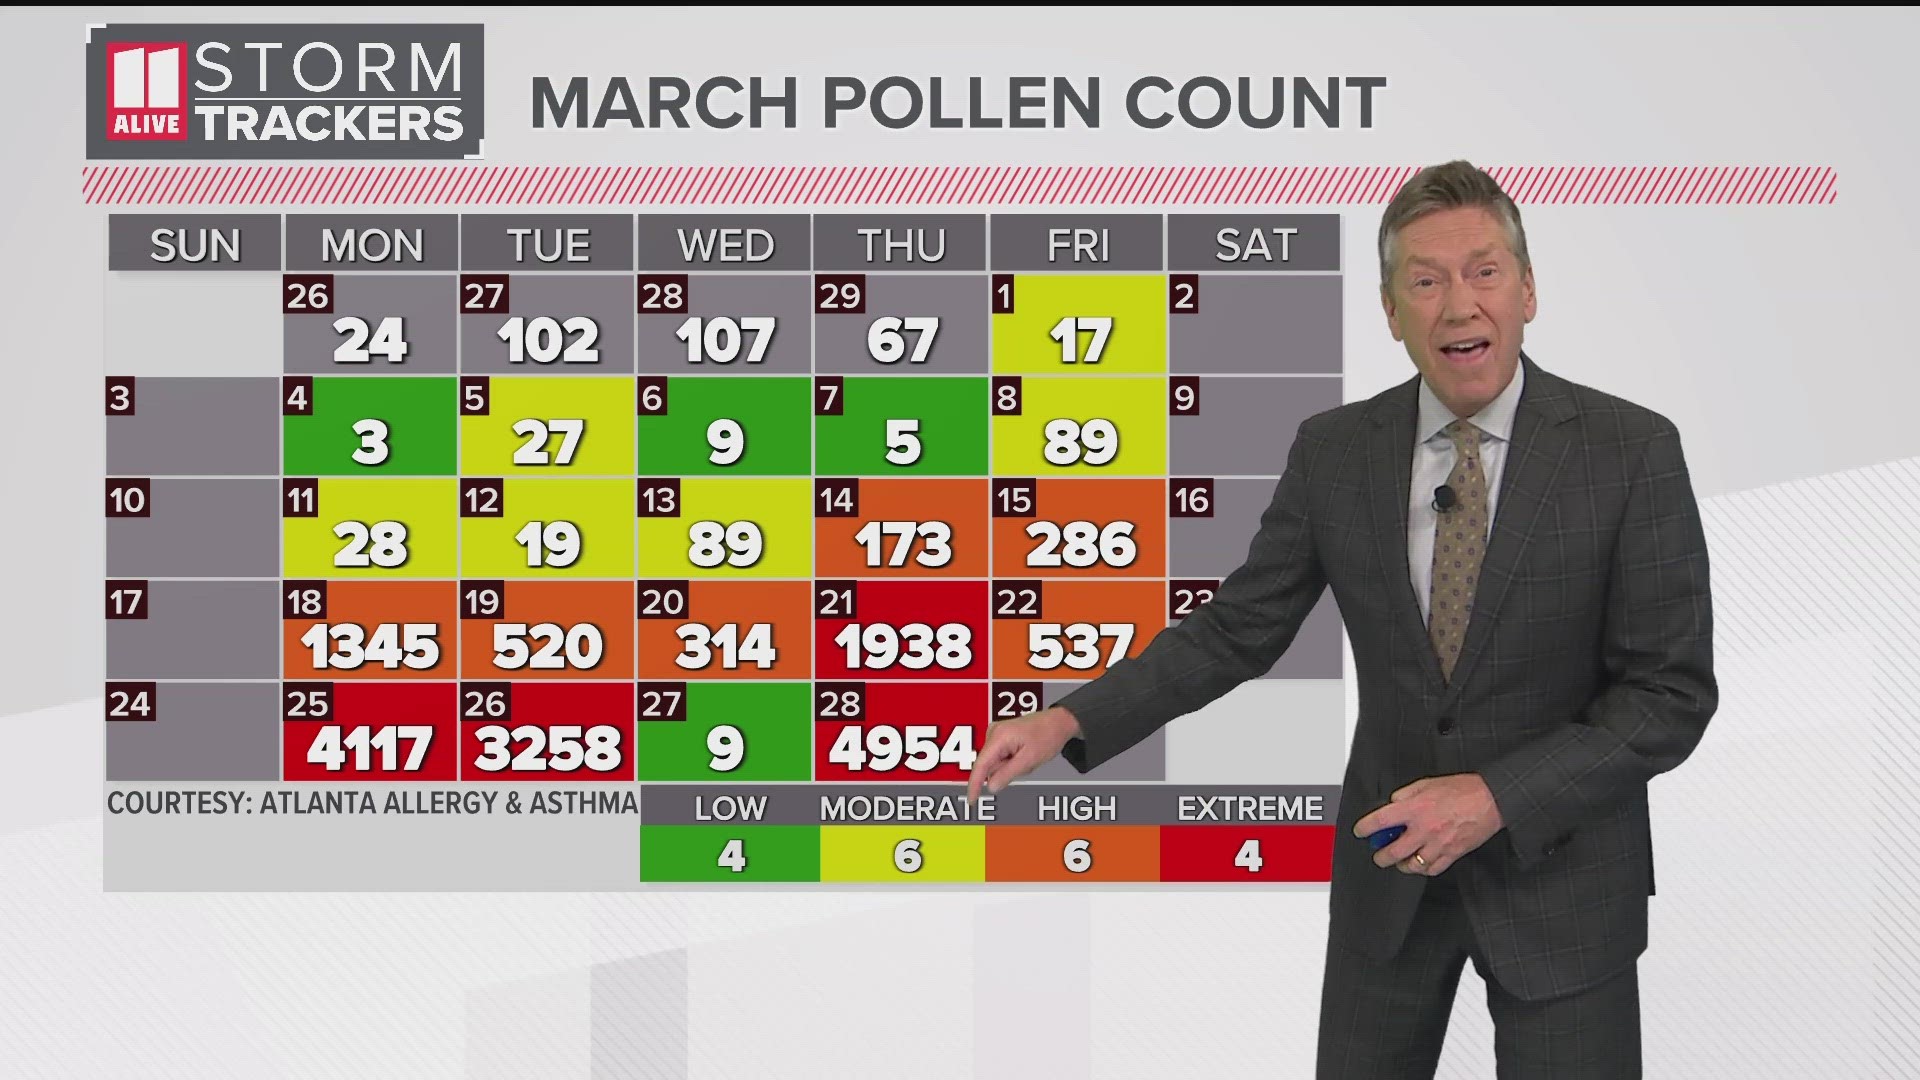 The peak season for sneezing, itchy eyes, and watery eyes is upon us. Atlanta Allergy and Asthma is providing daily pollen counts for the capitol of the Peach State.